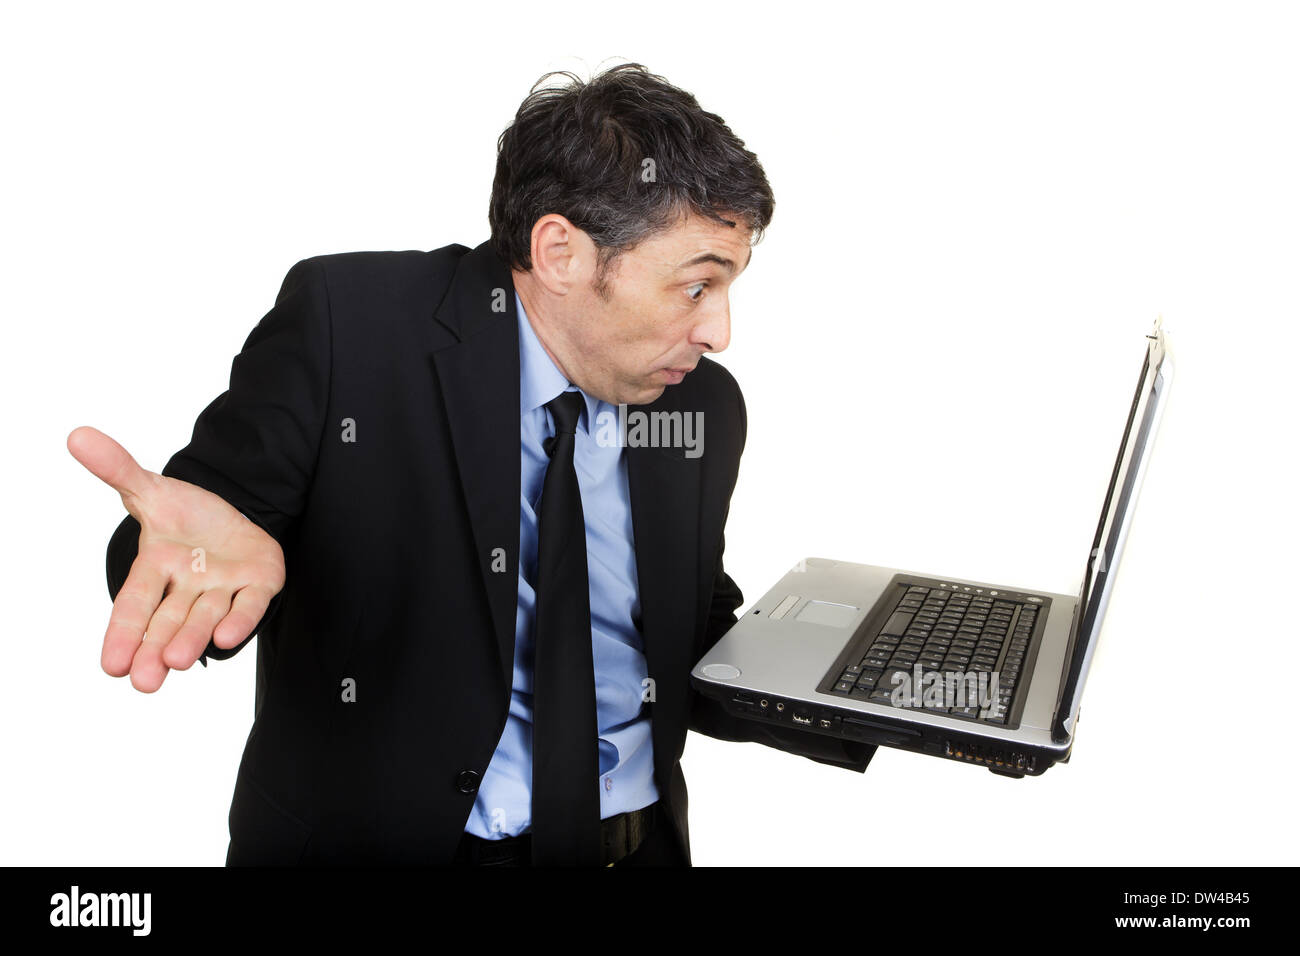 Businessman shrugging his shoulders and gesturing in disbelief or indifference as he reads his handheld laptop Stock Photo